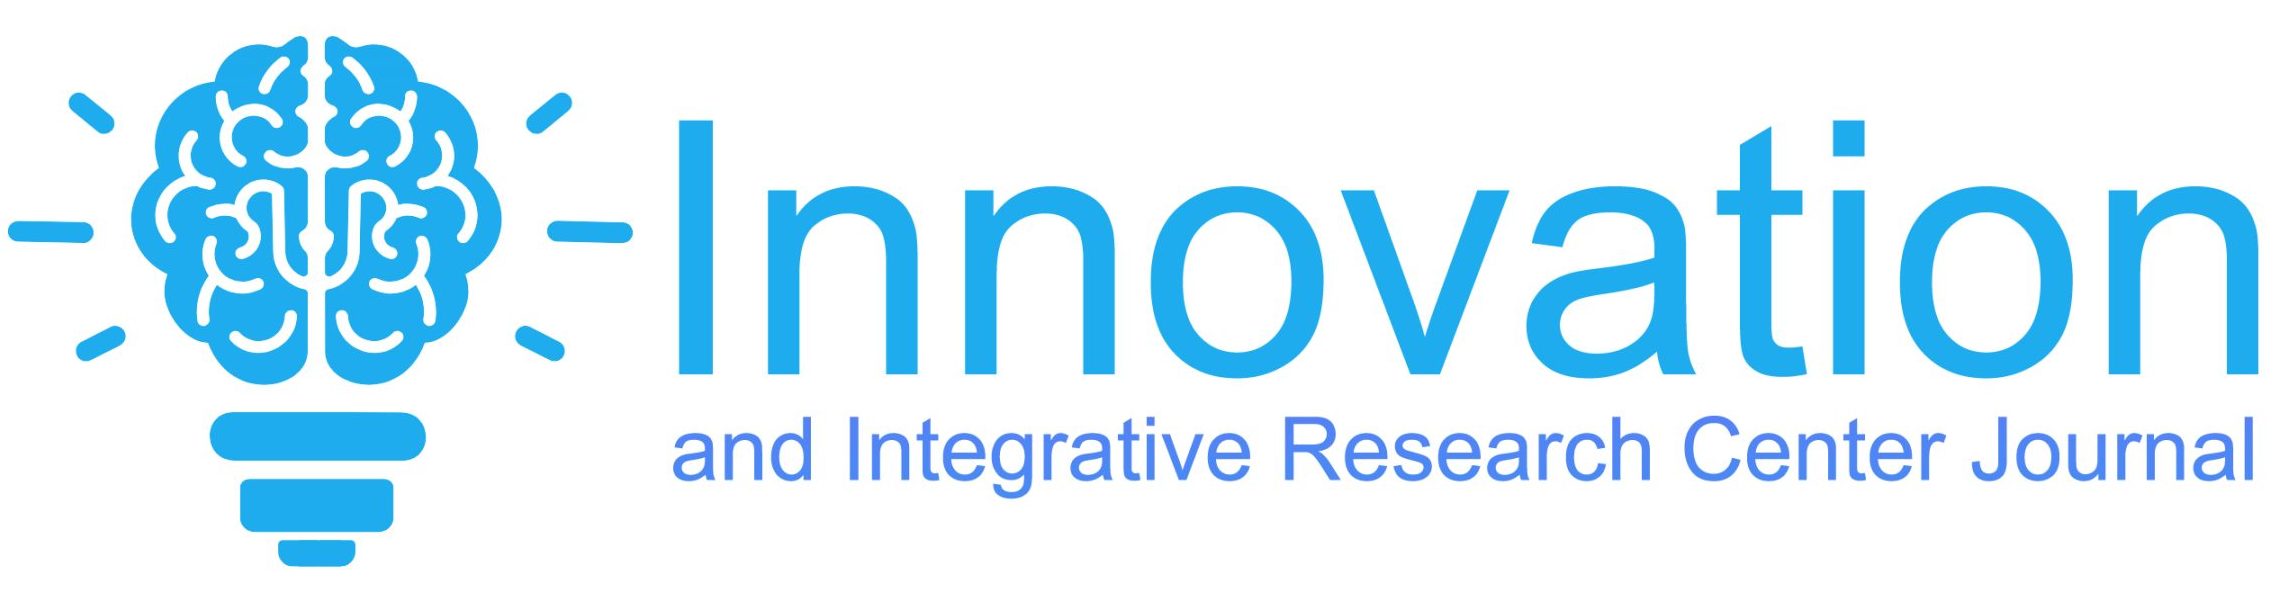 Innovation and Integrative Research Center Journal